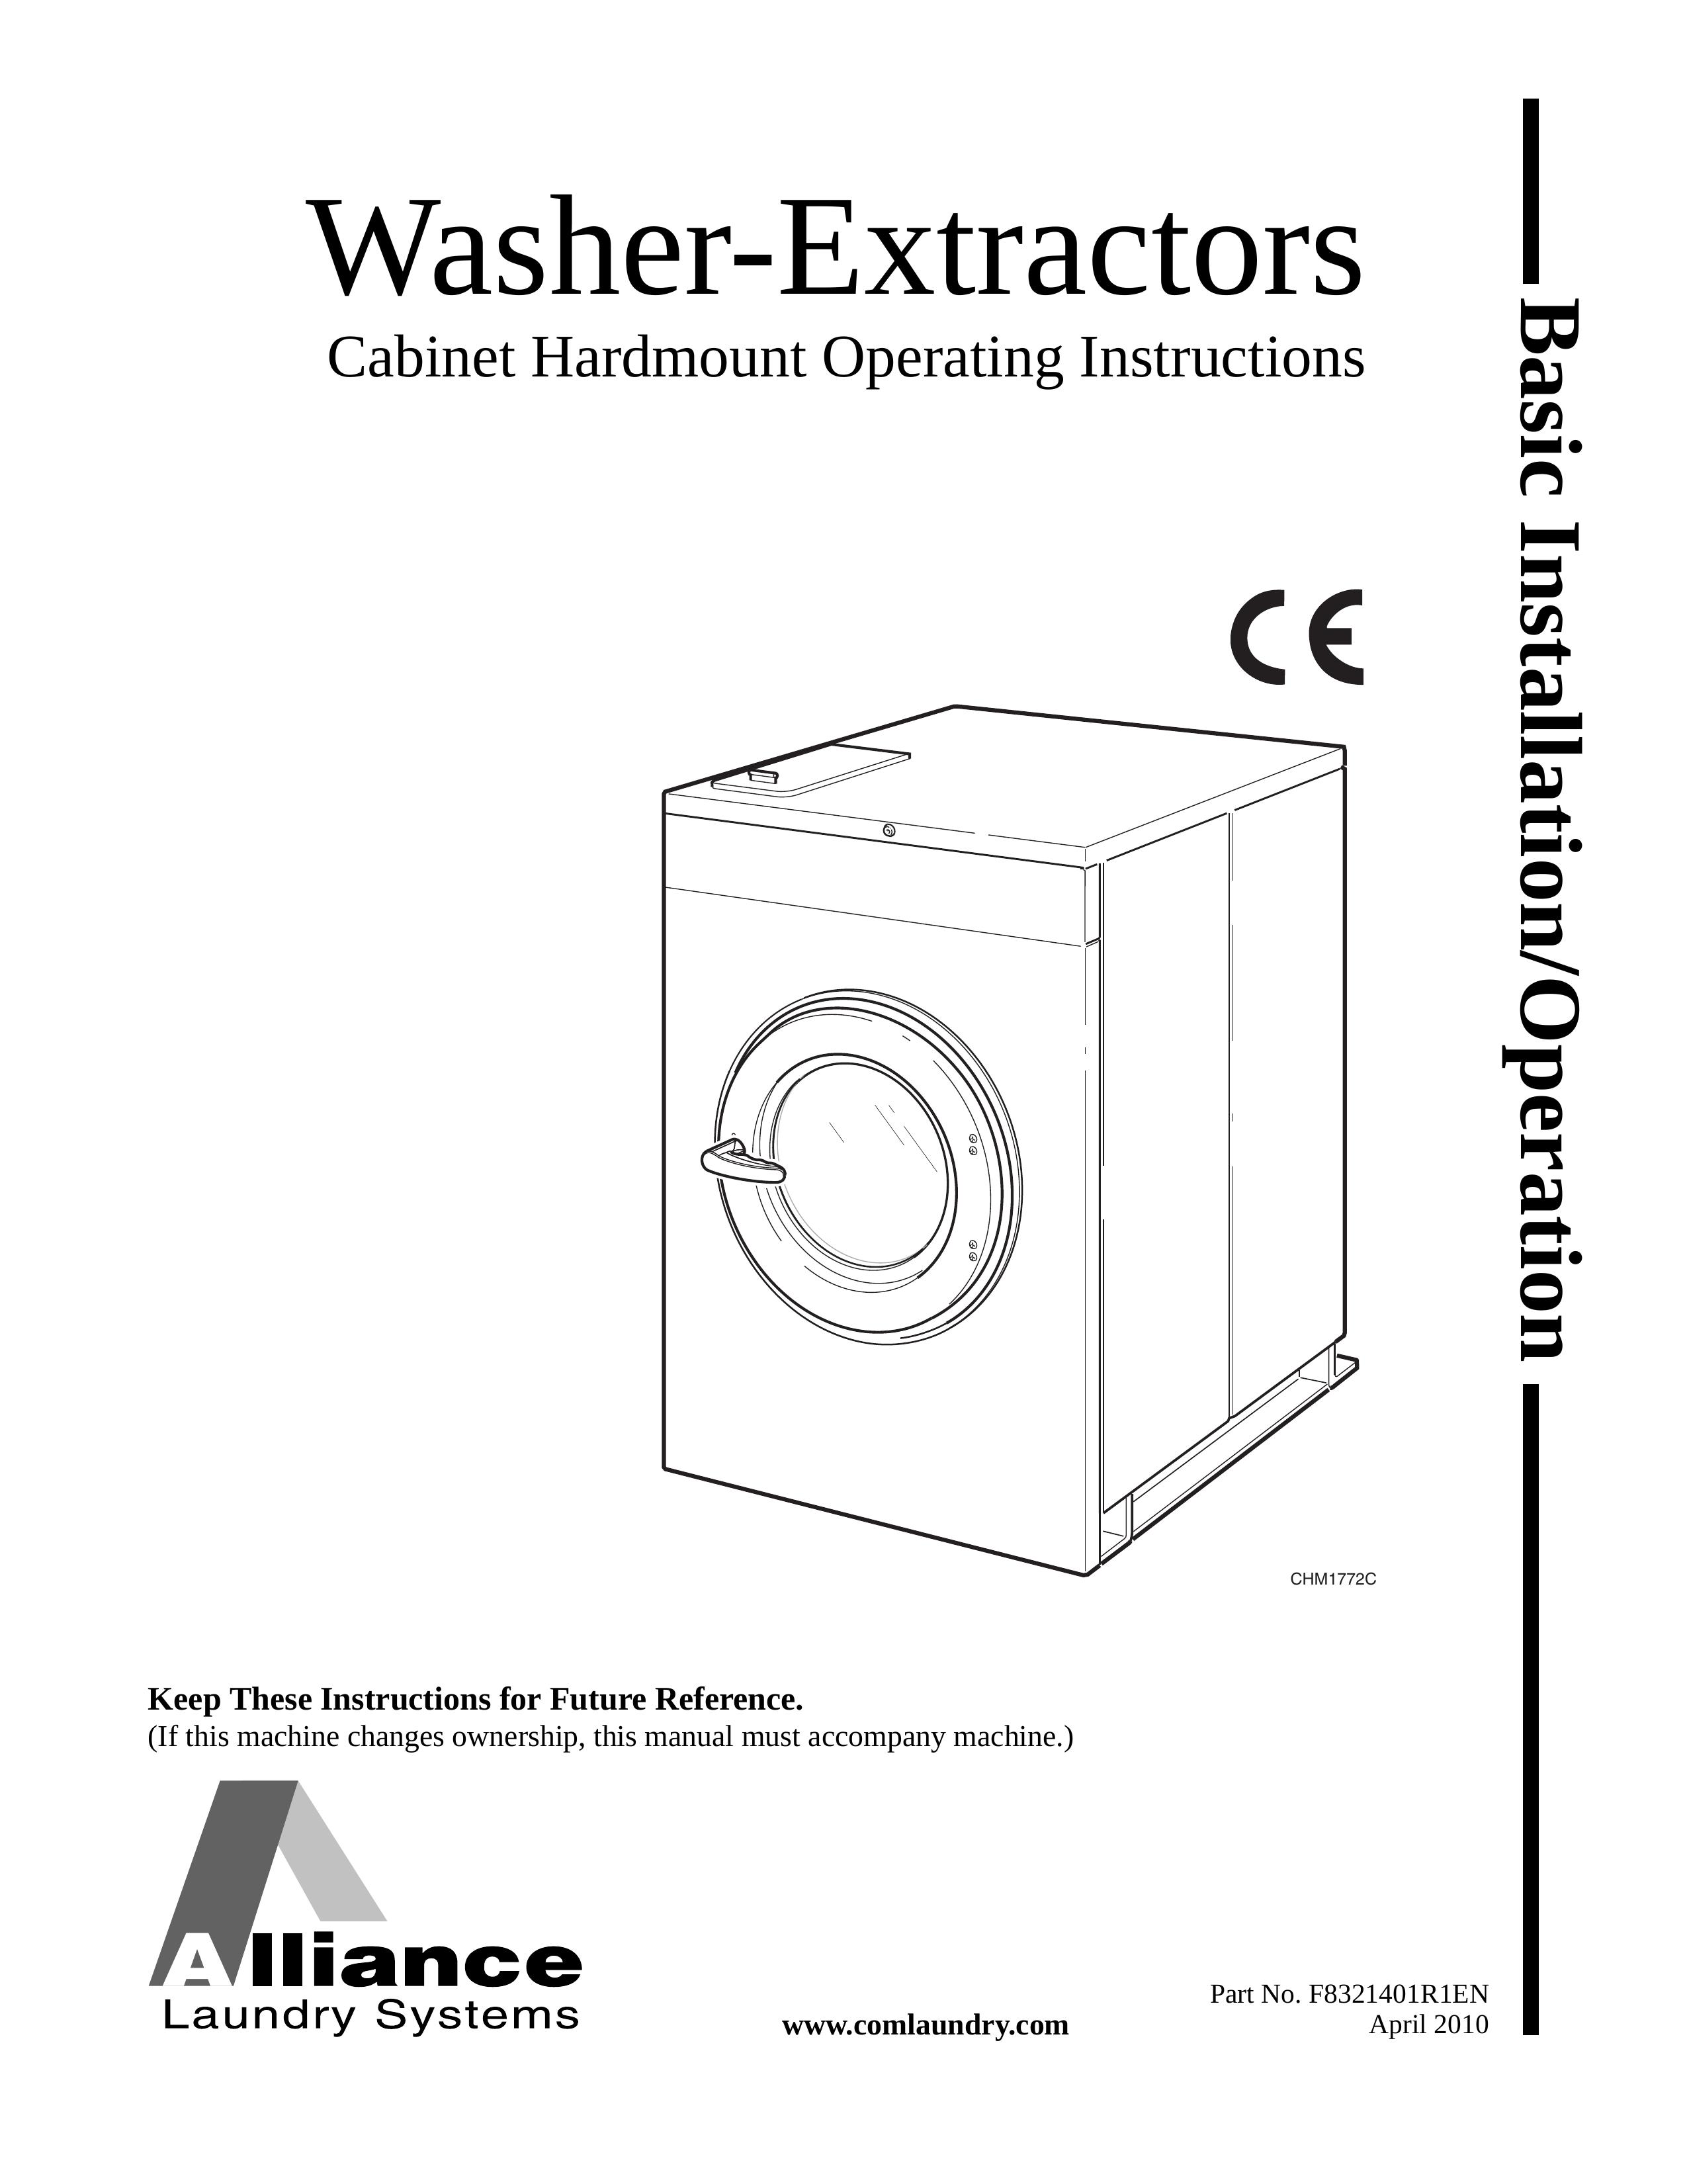 Alliance Laundry Systems CHM1772C Washer User Manual